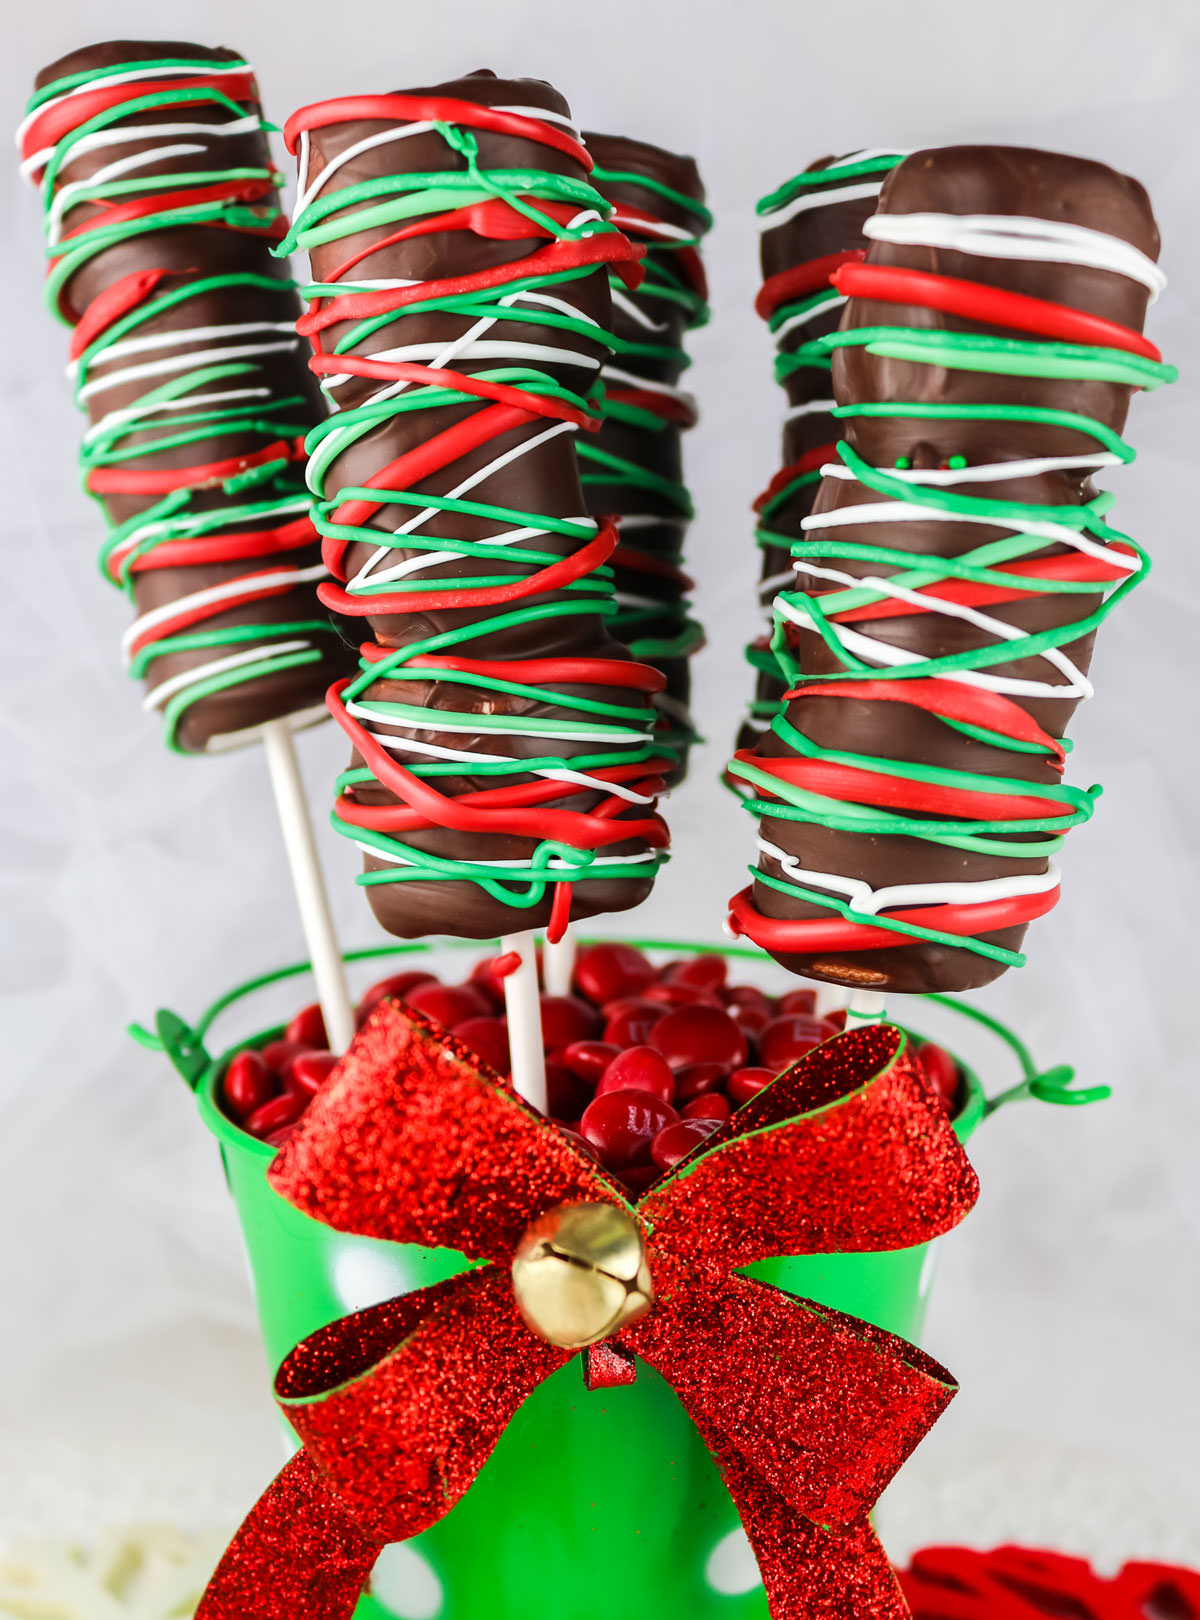 Five Christmas Marshmallow Pops sticking out of a green mini bucket with a red bow.